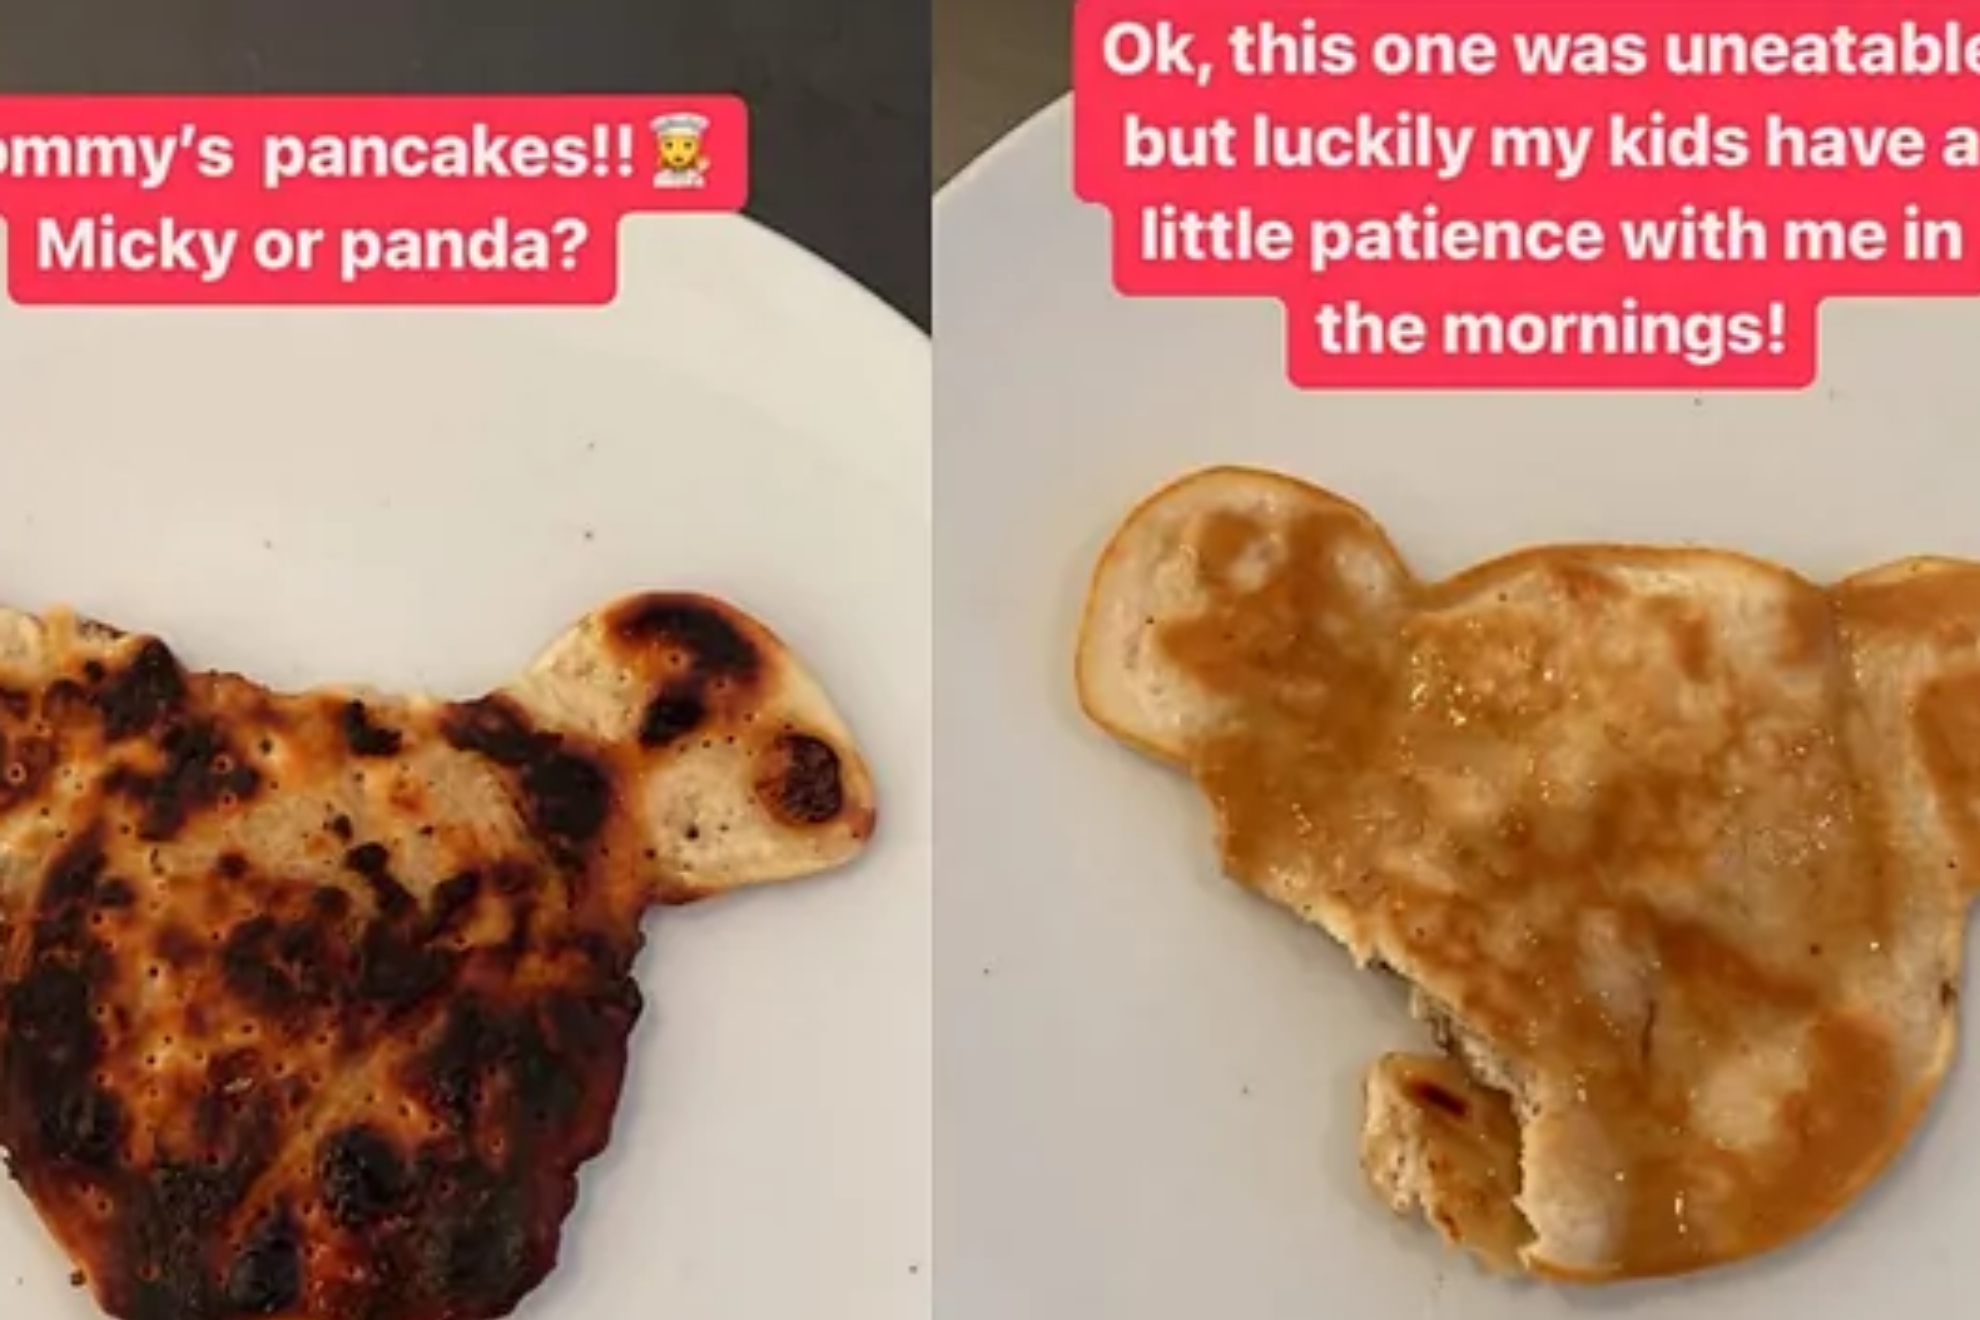 The pancakes that Shakira made for her children.